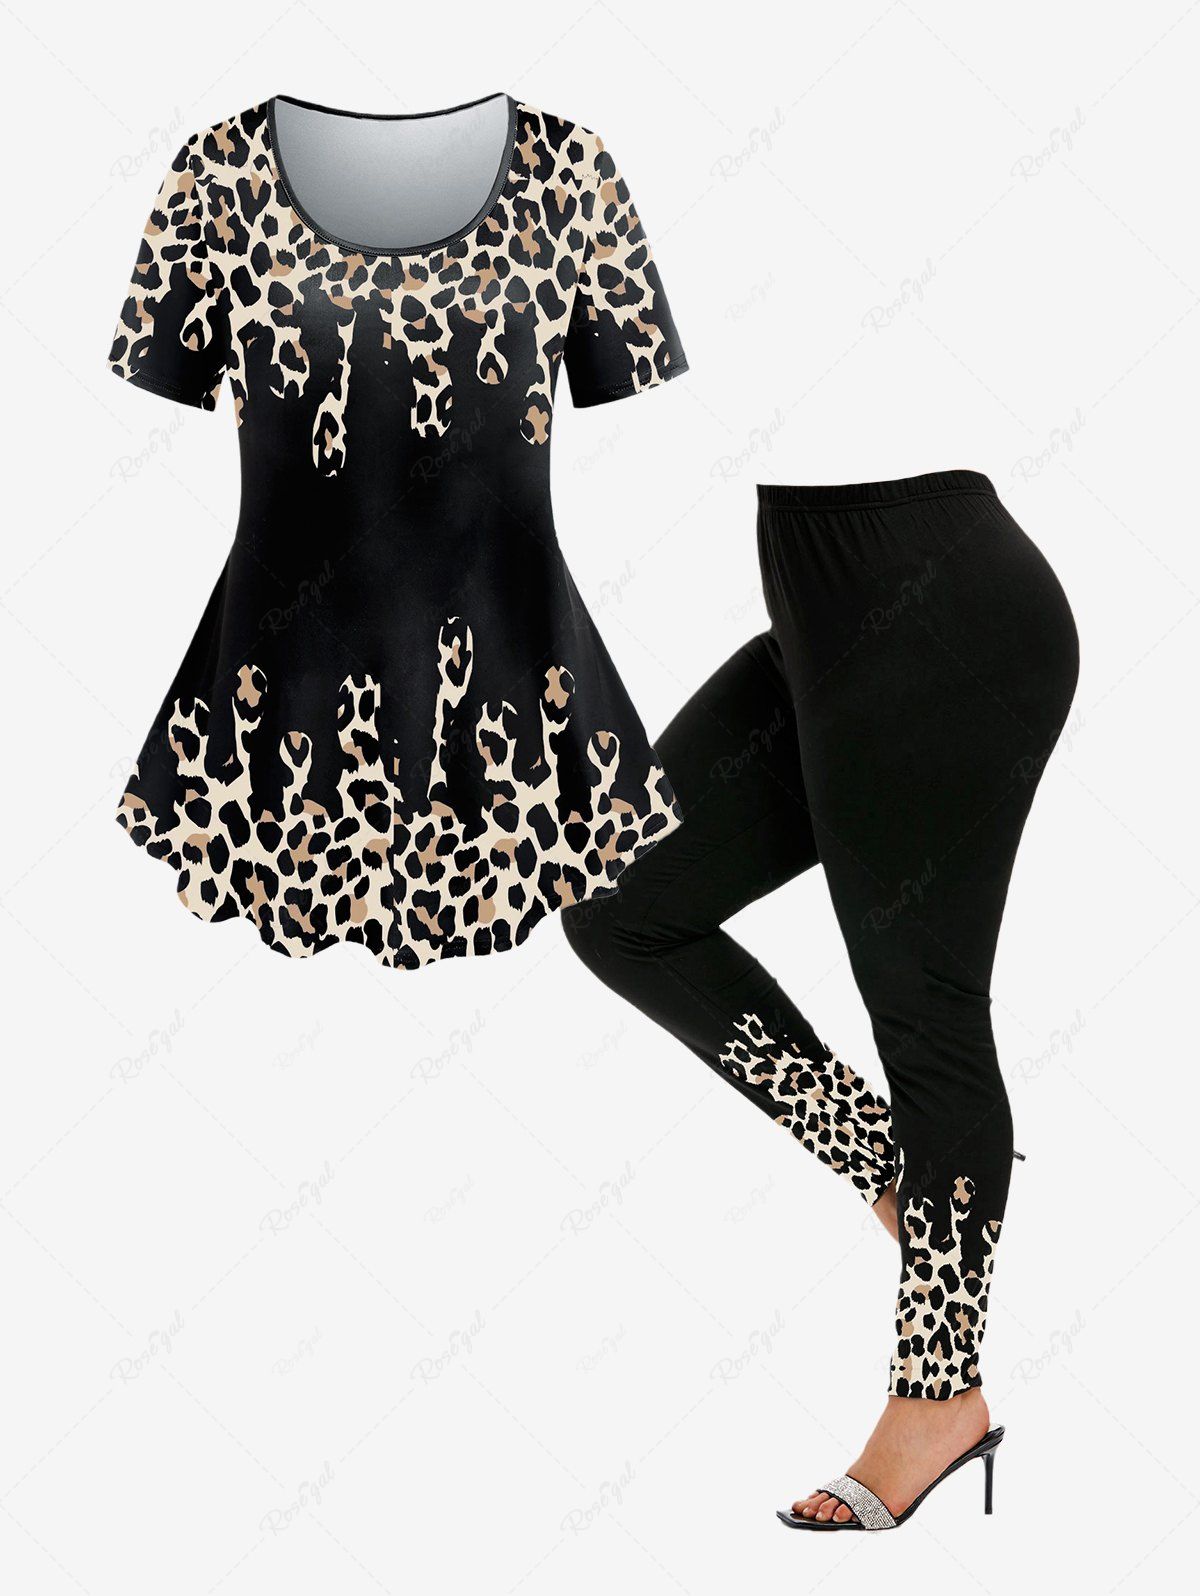 Discount Leopard Print T-shirt and High Waist Animal Leopard Leggings Plus Size Outfit  